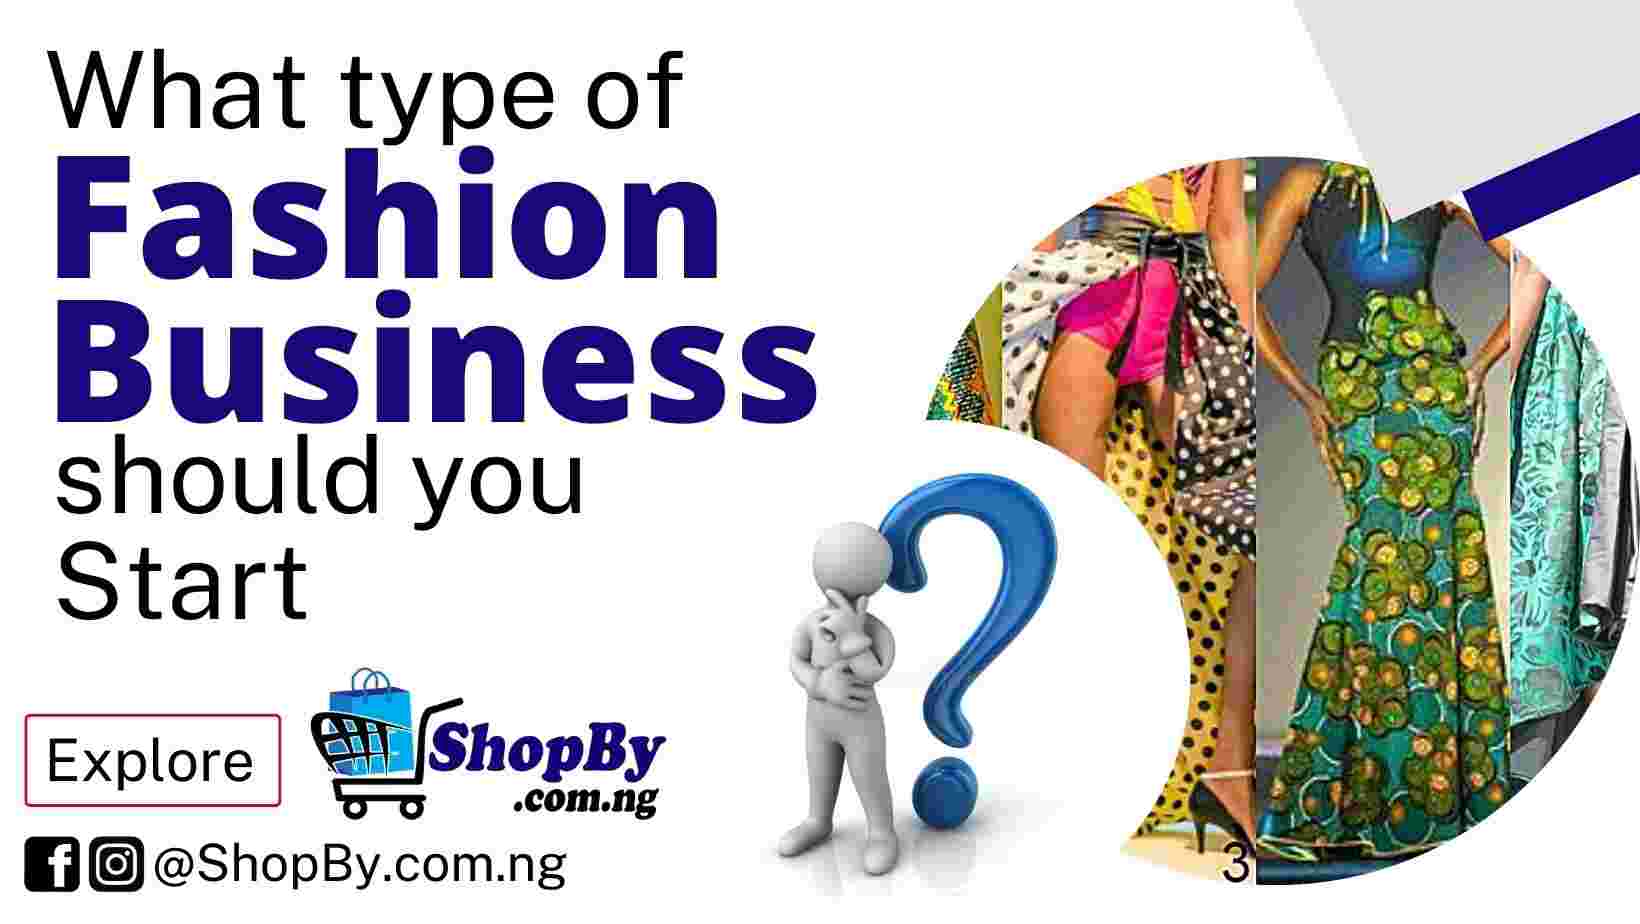 Types of Fashion Business